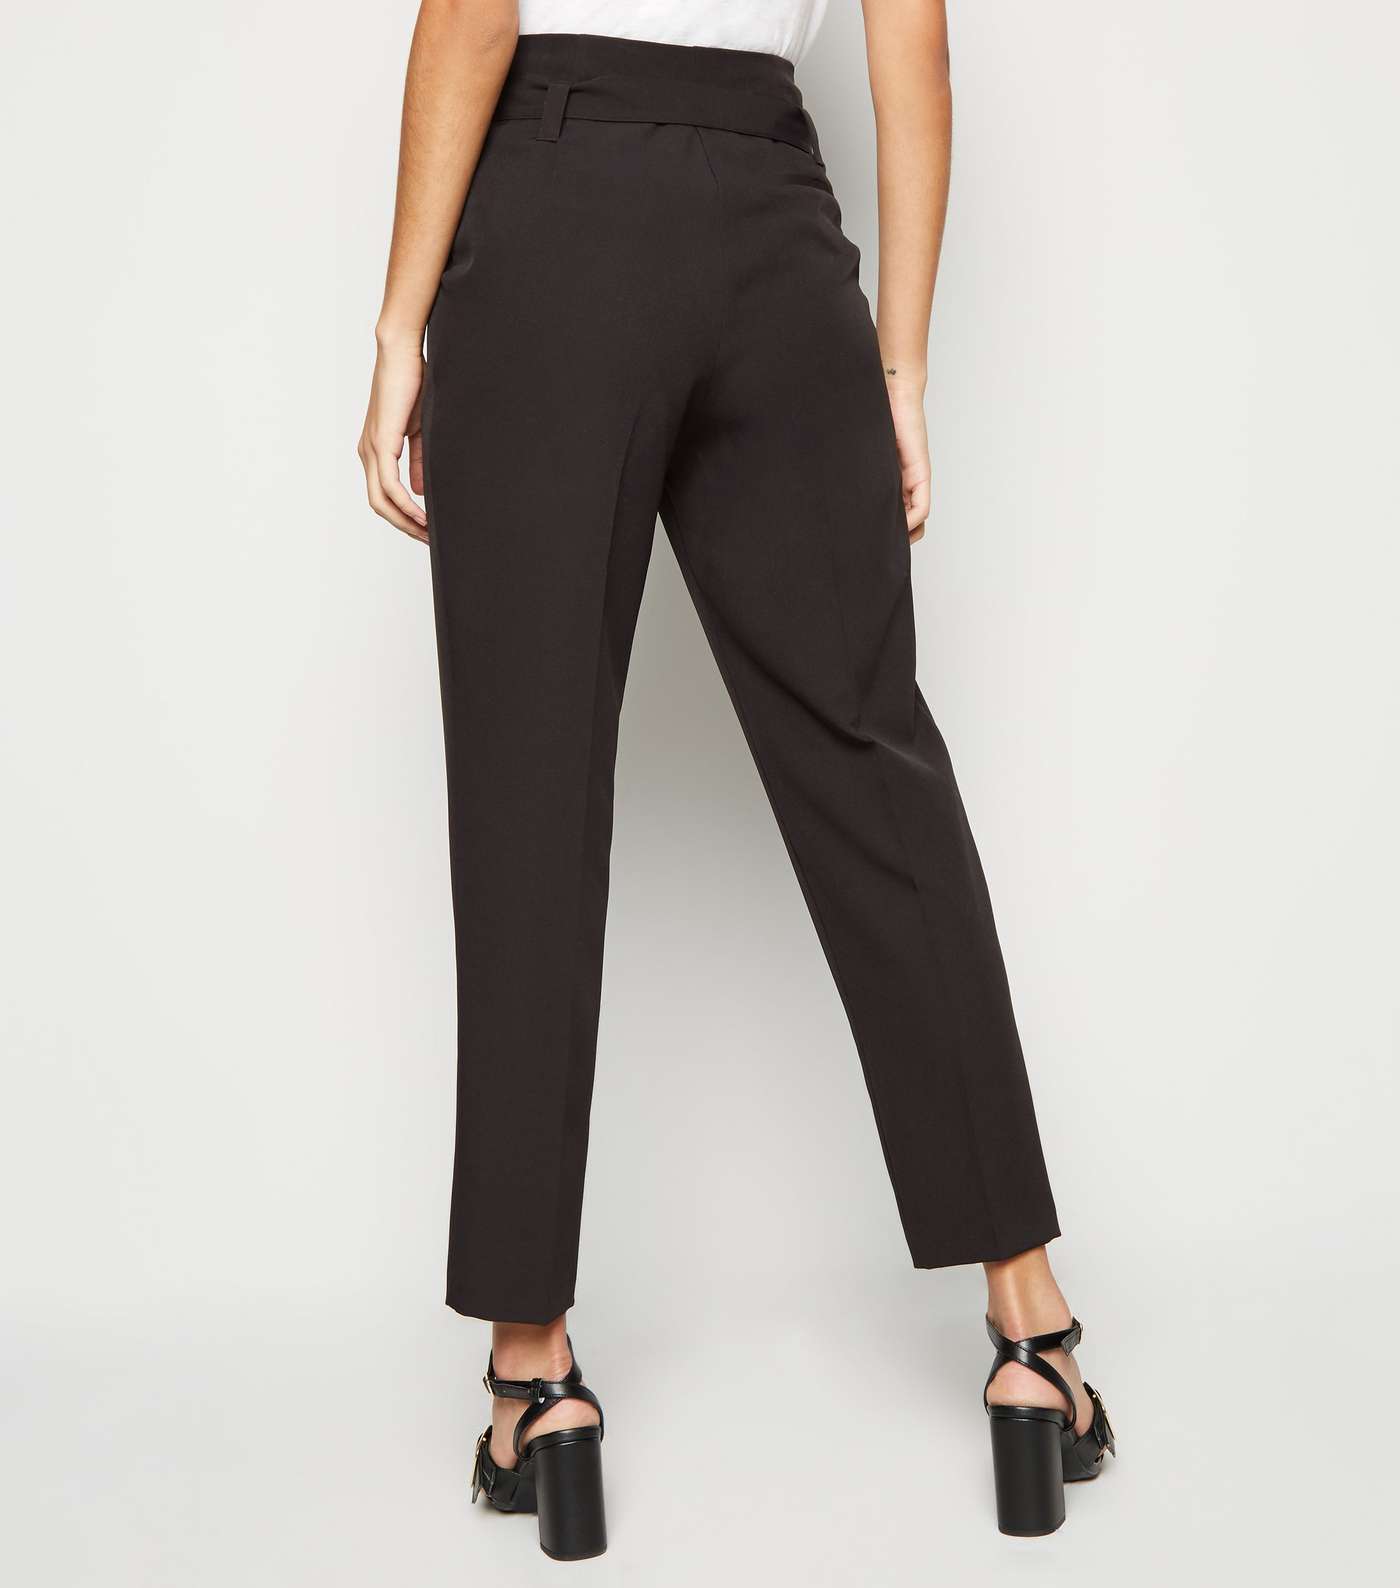 Black Belted High Waist Trousers Image 3